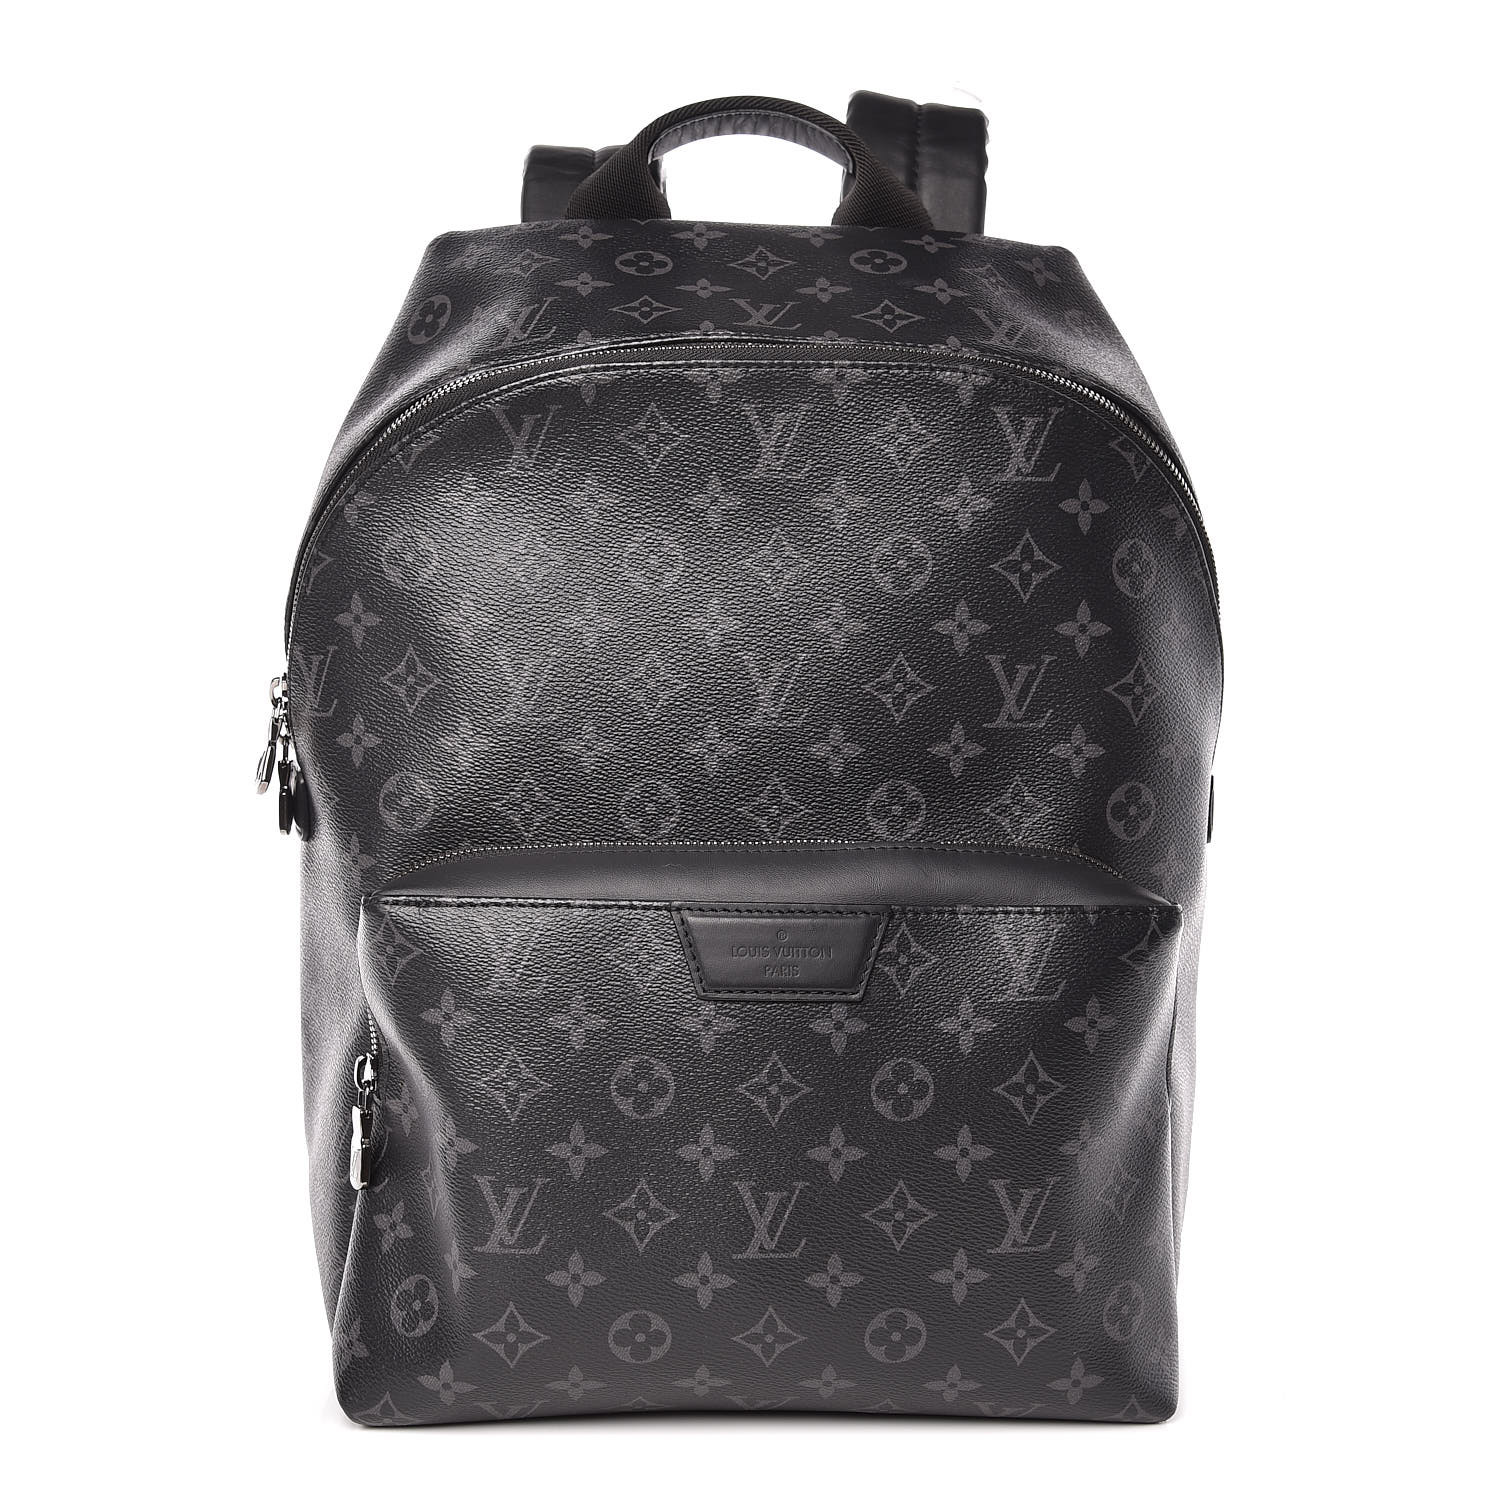 LOUIS VUITTON Monogram Eclipse Discovery Backpack PM 406820